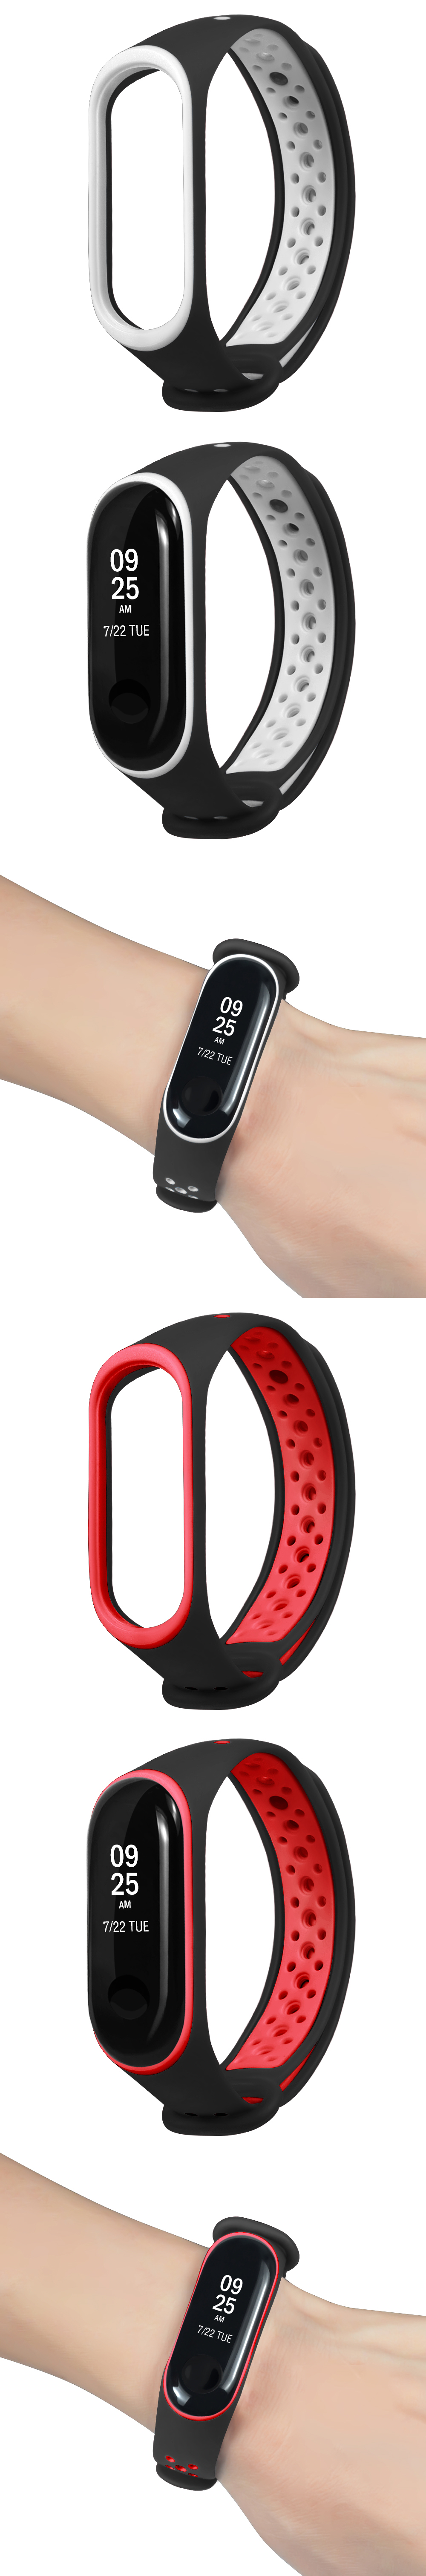 Bakeey-Double-Color-Silicone-Watch-Strap-Replacement-Smart-Watch-for-Xiaomi-Mi-Band-3-Non-original-1368816-1